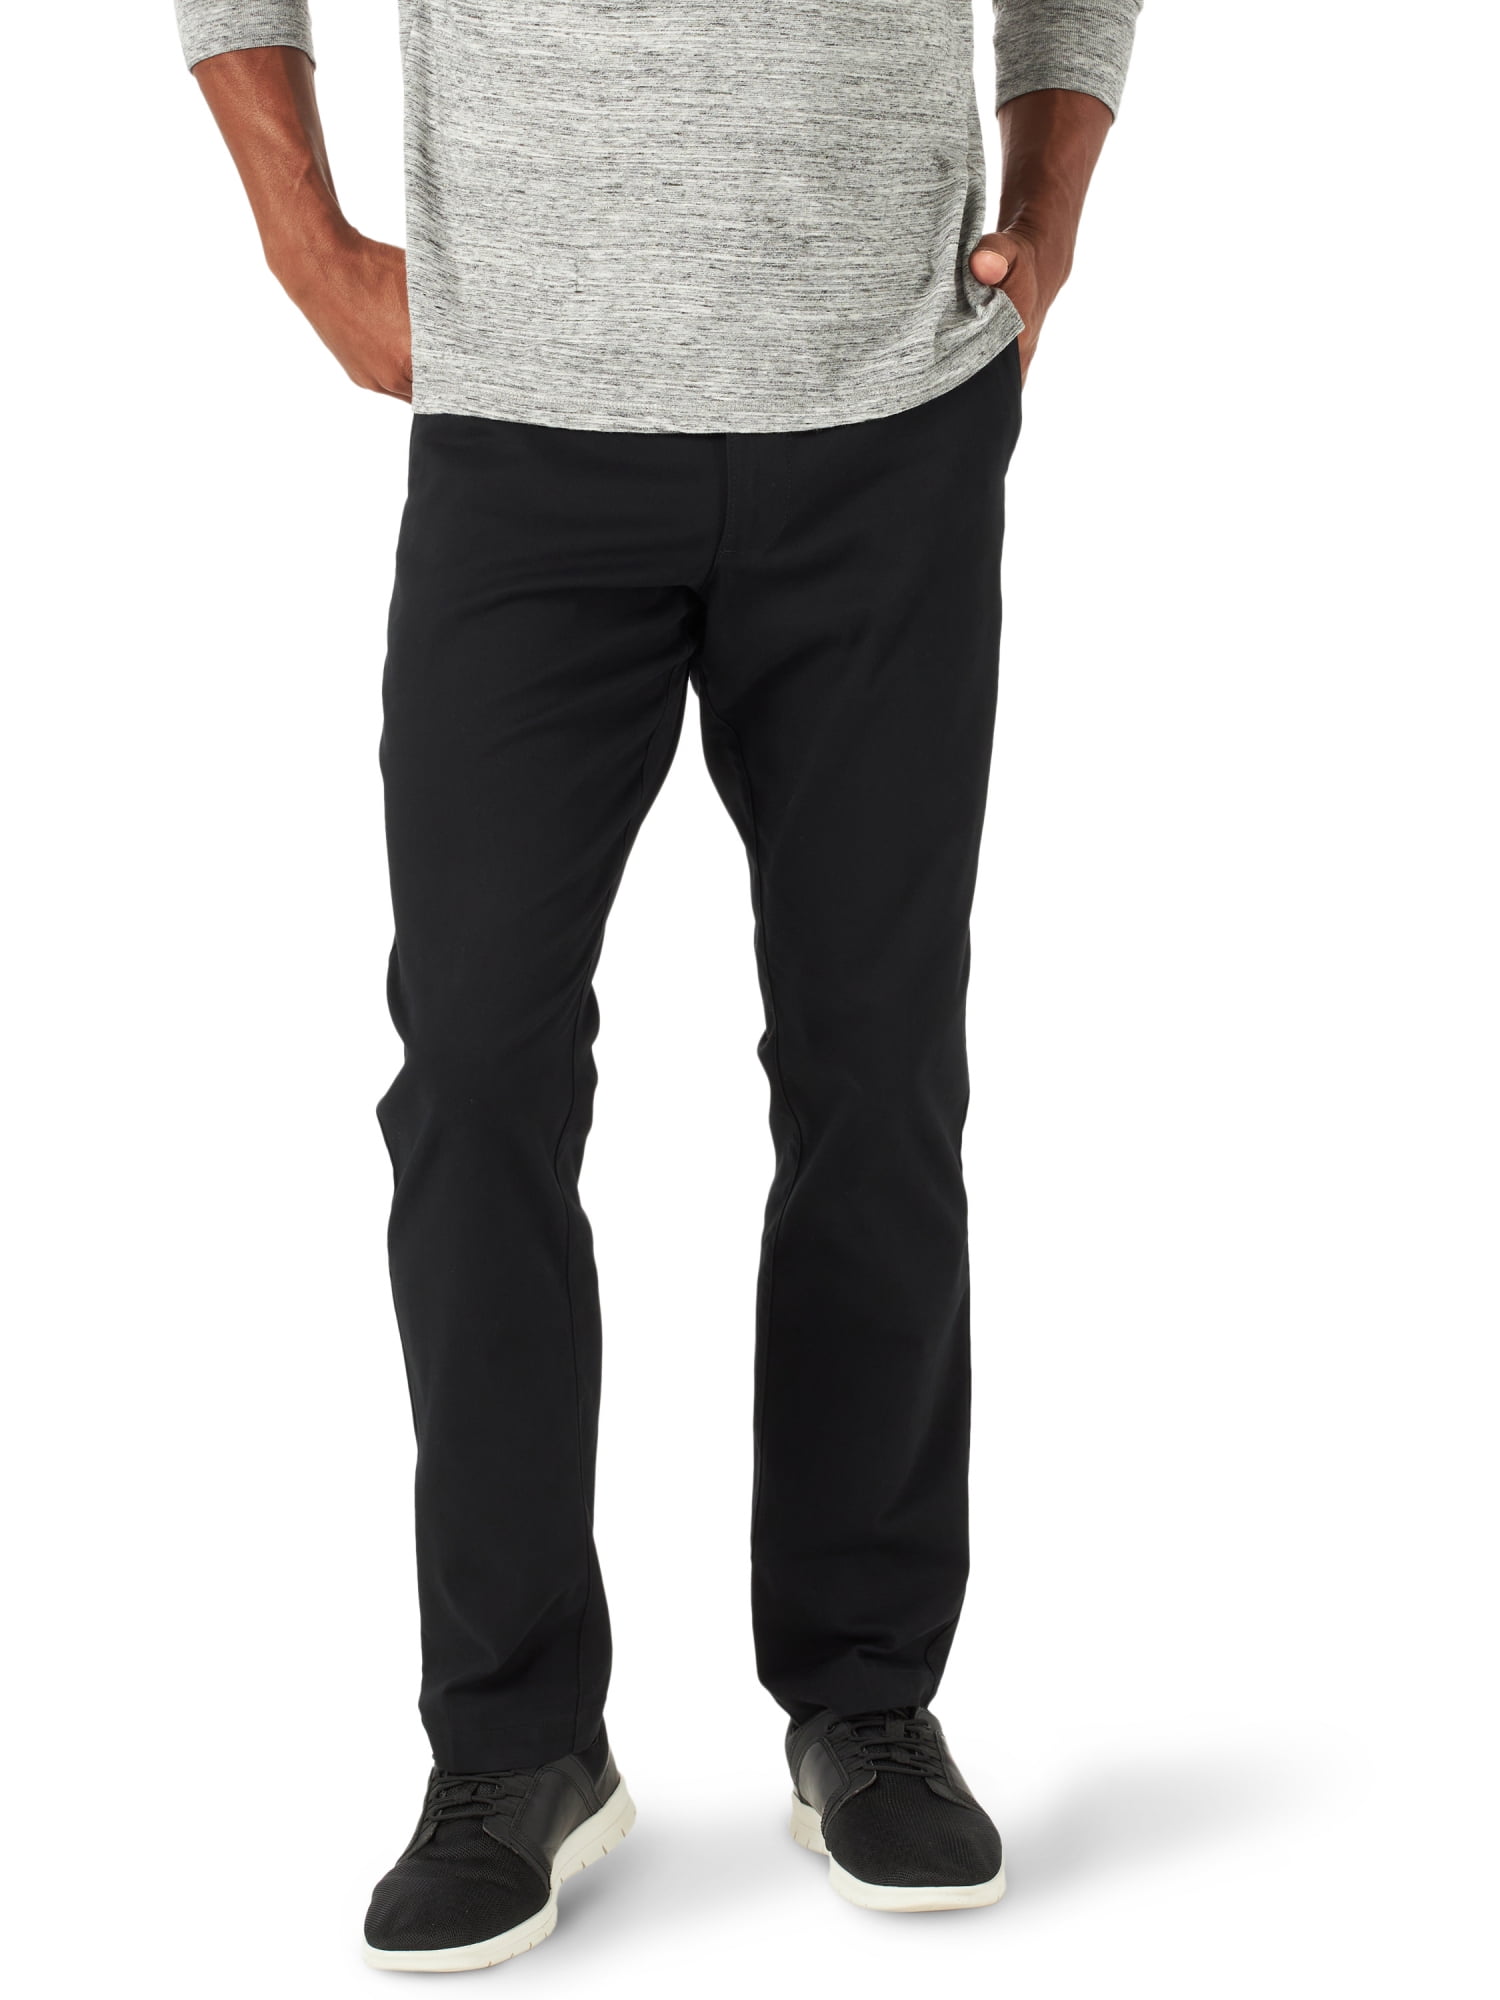 Lee Men's Extreme Comfort Relaxed Fit Pant 